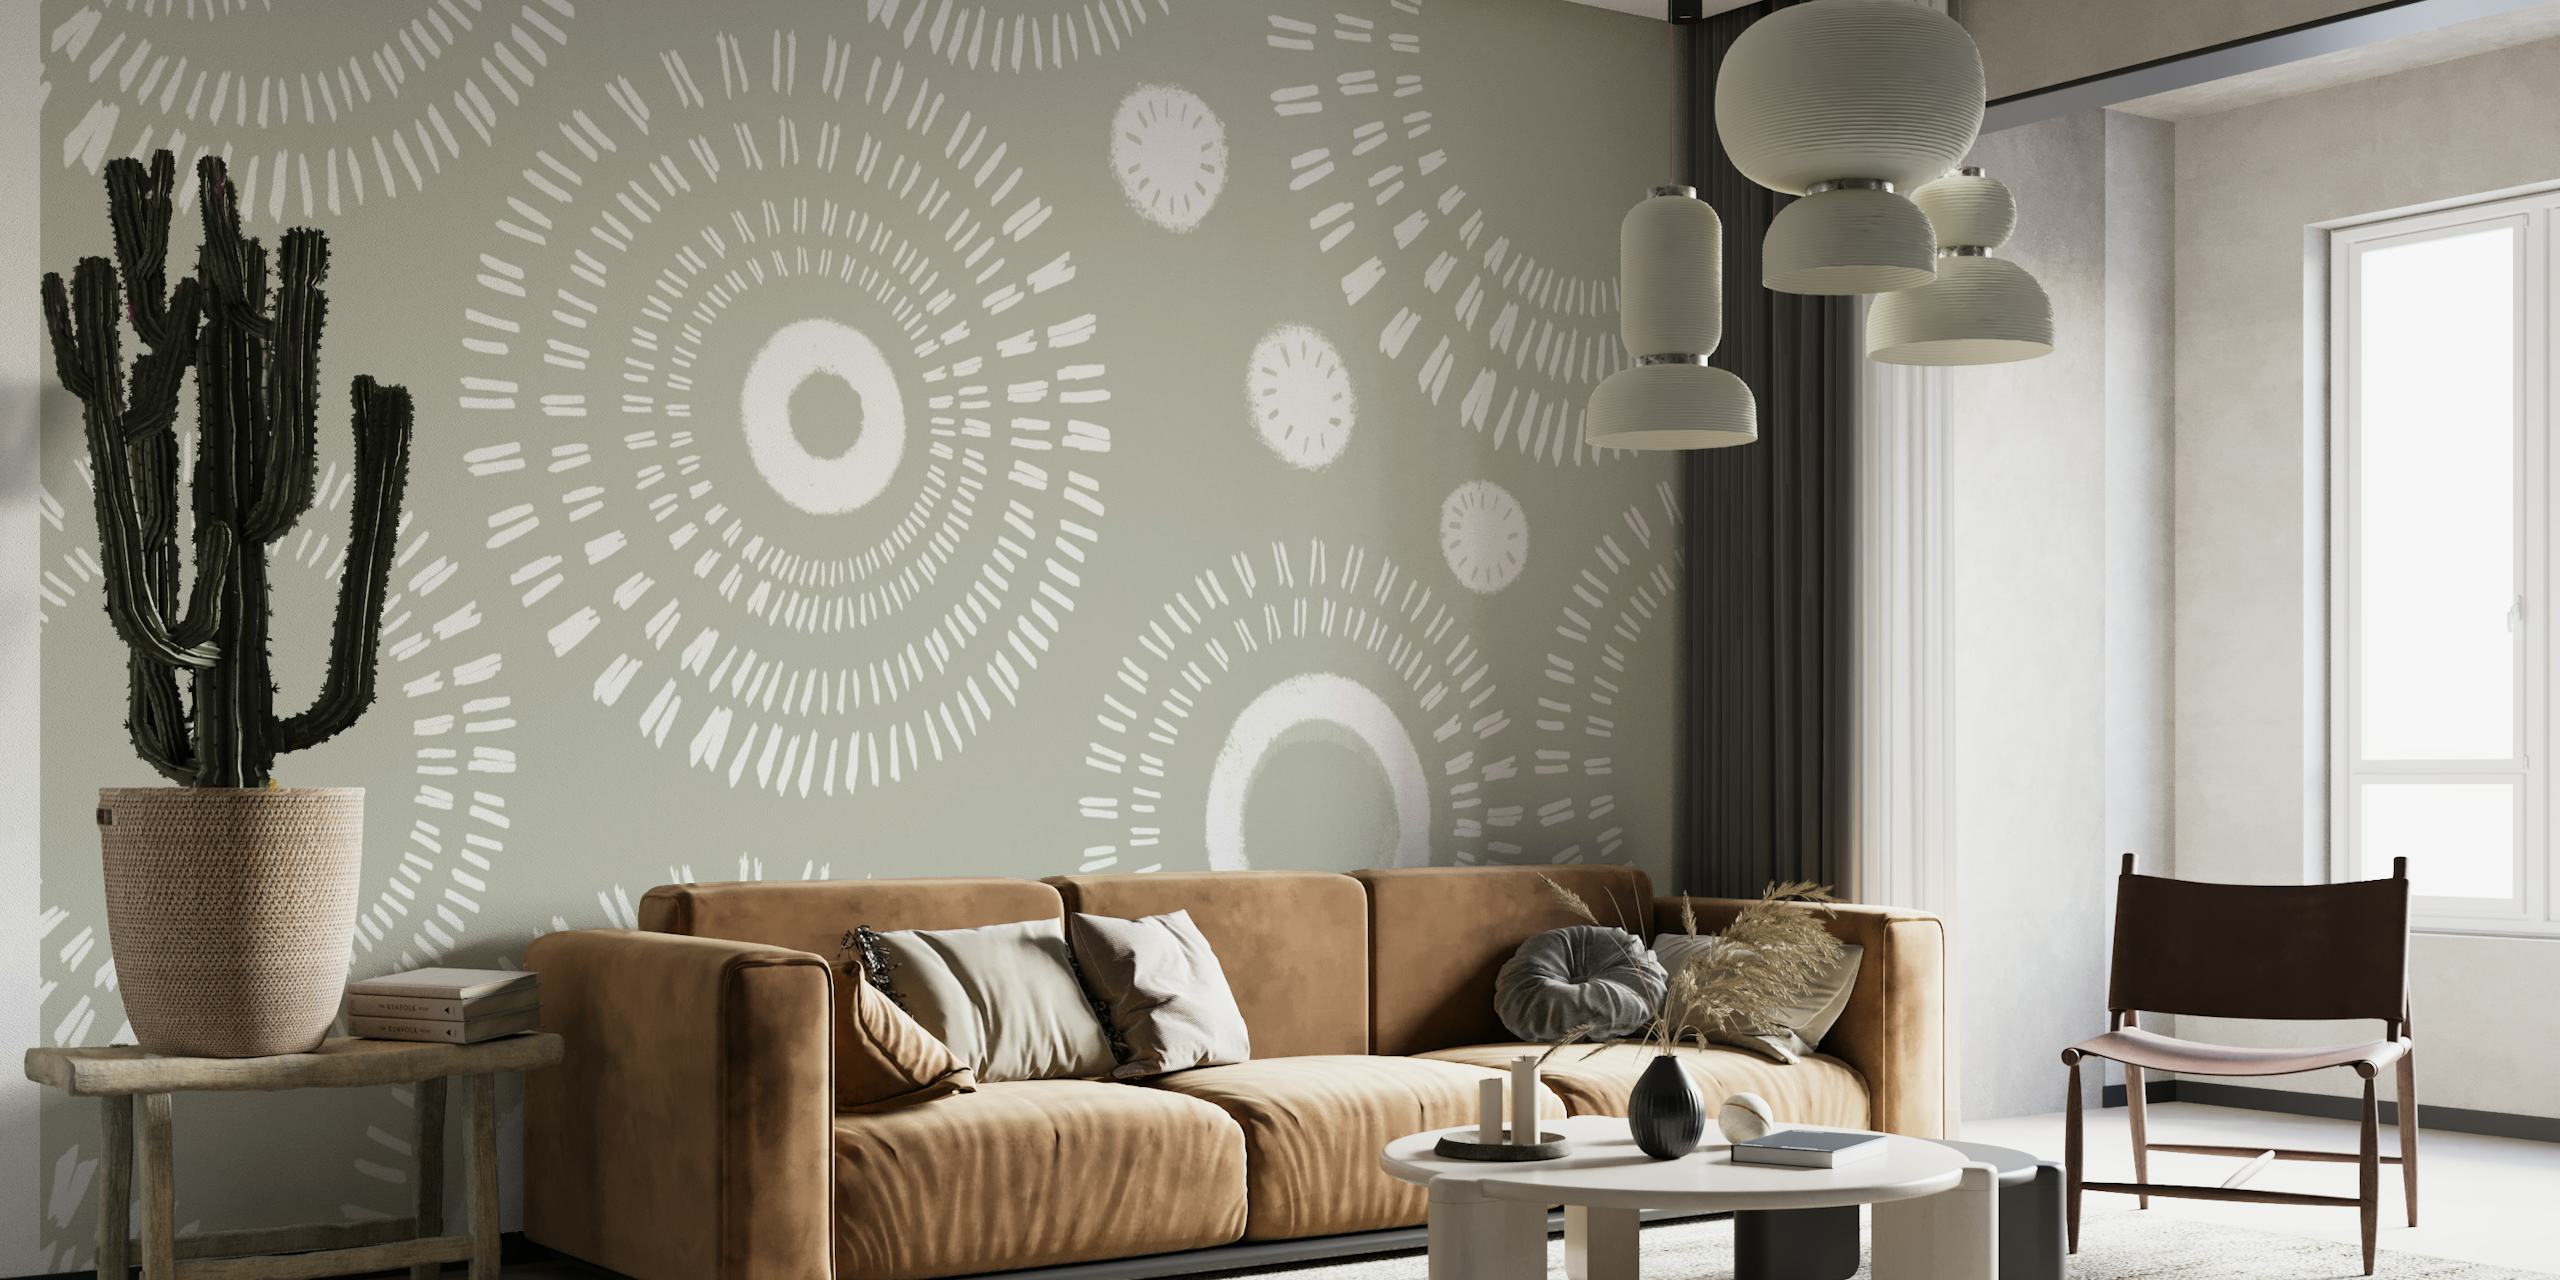 Boho-inspired wall mural with mandala patterns in neutral tones